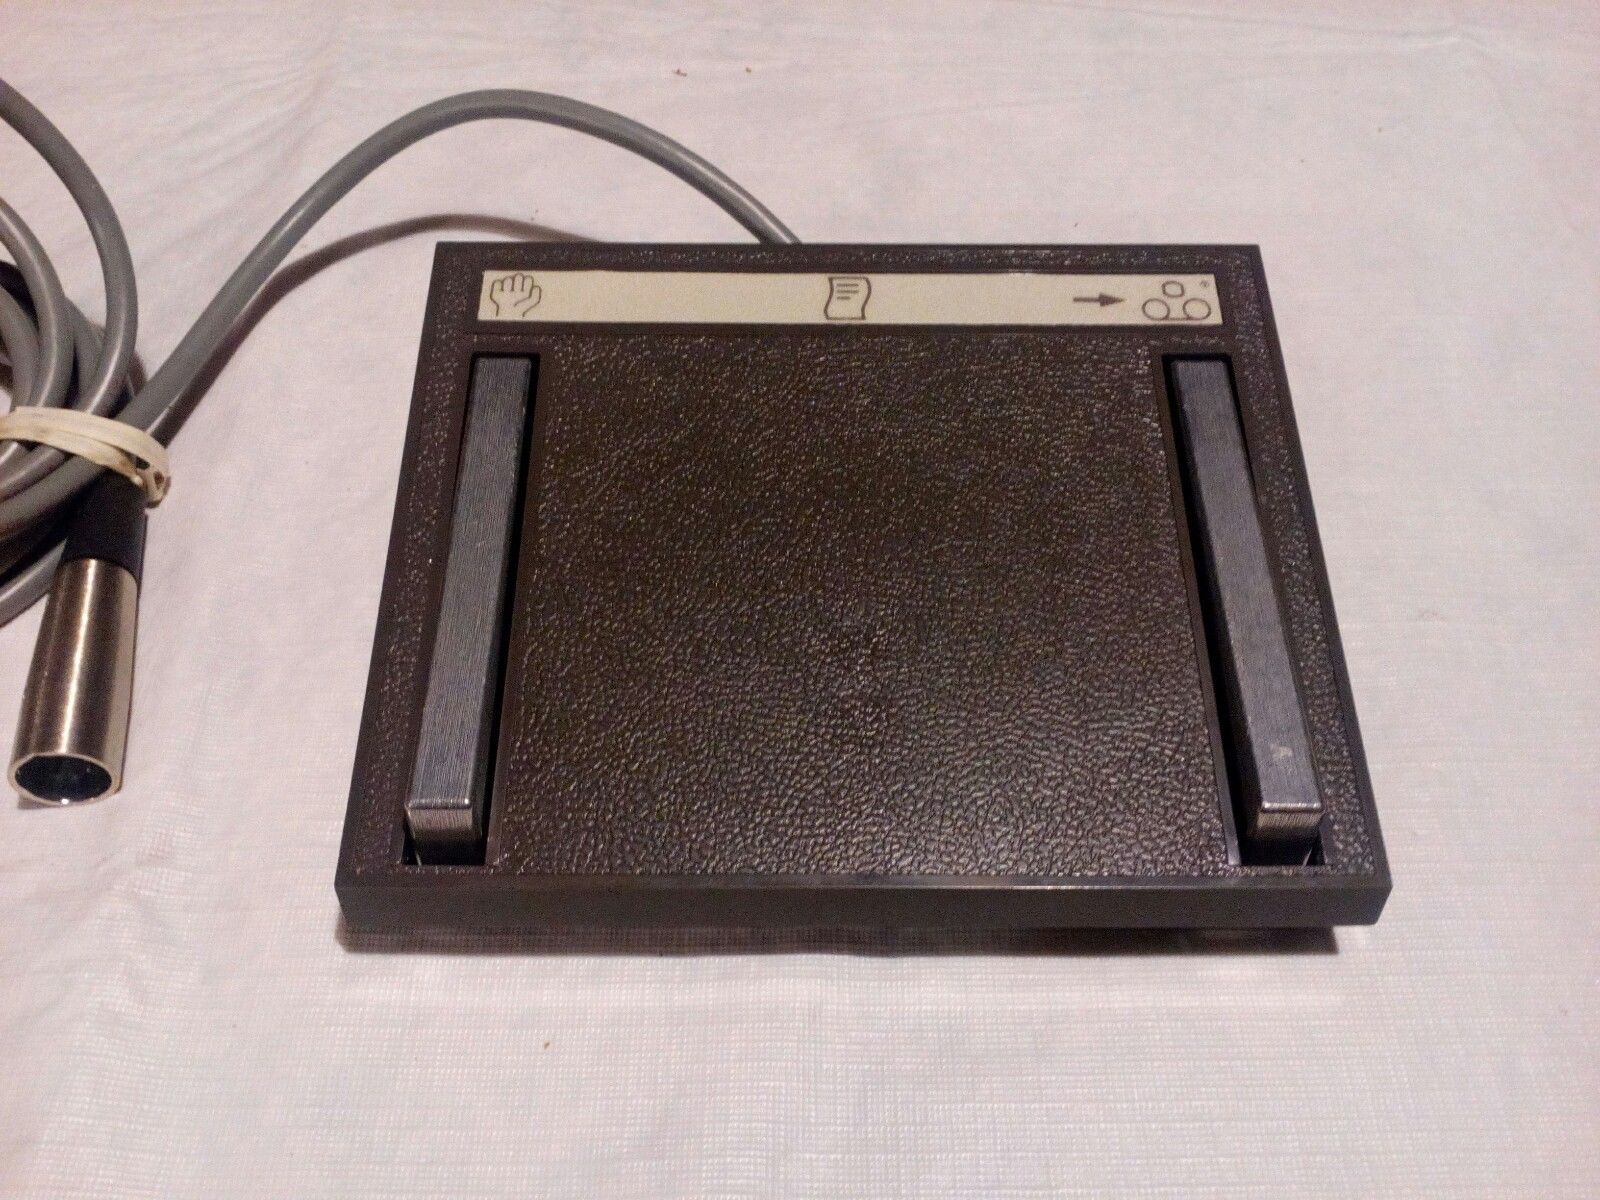 a black electronic device with two wires connected to it